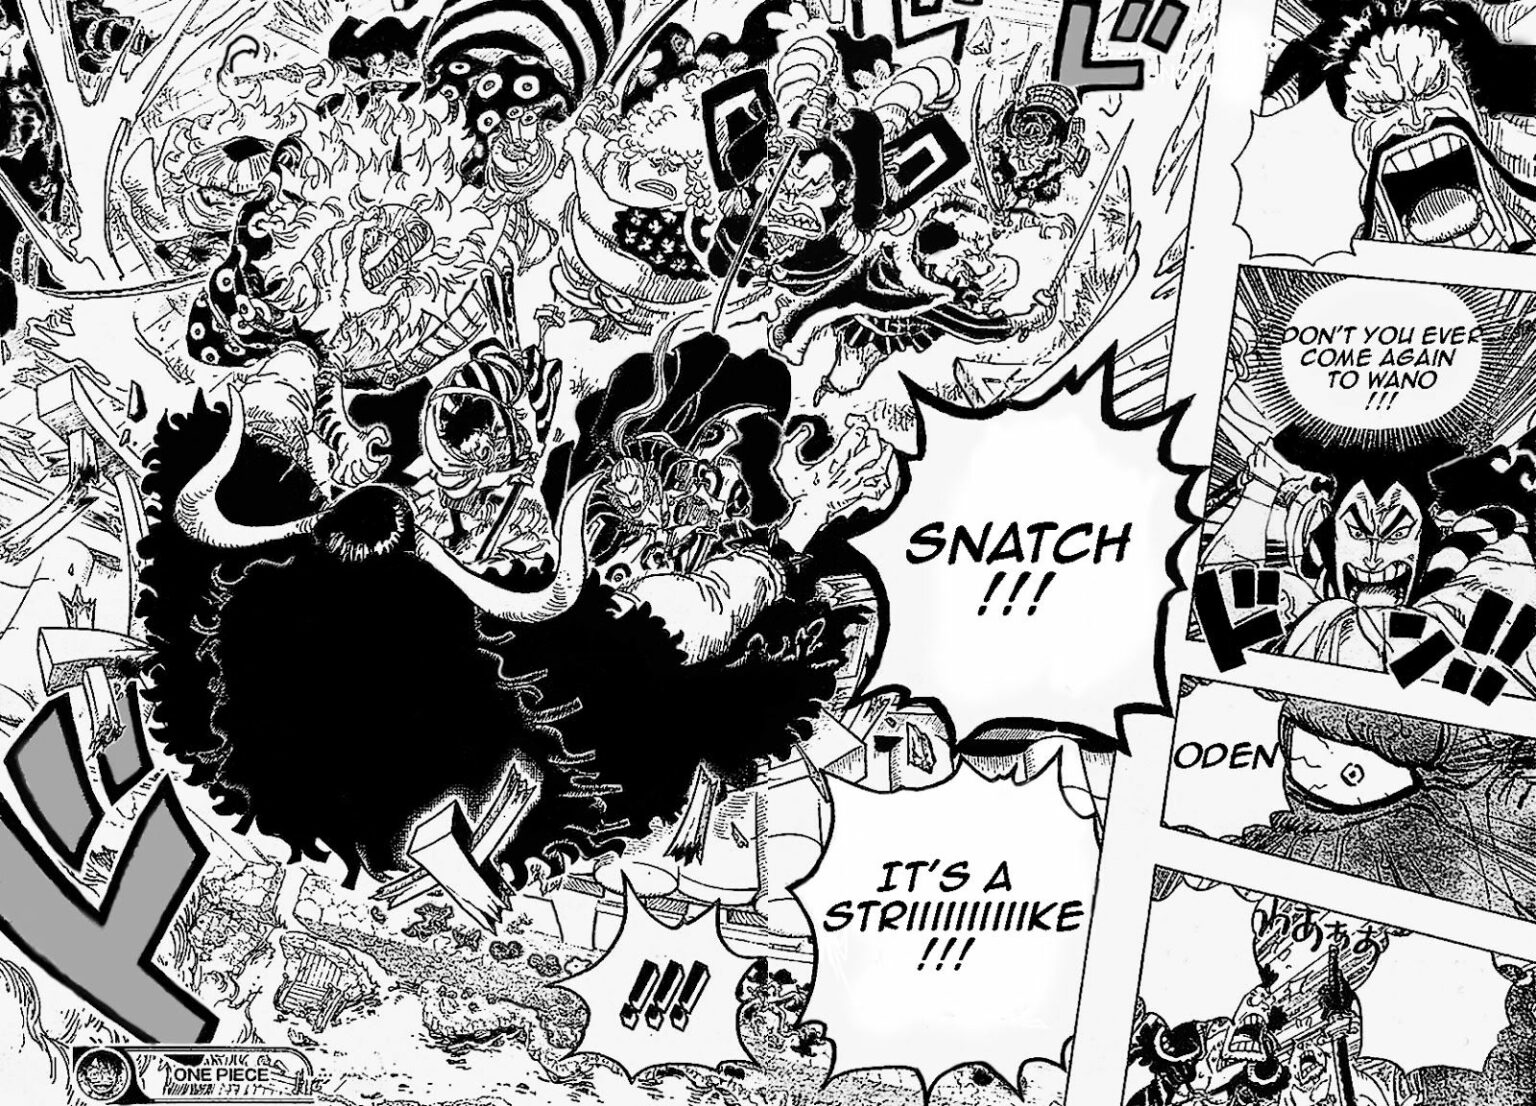 One Piece Chapter 986: The END of Kaido in One Piece? Luffy x Yamato